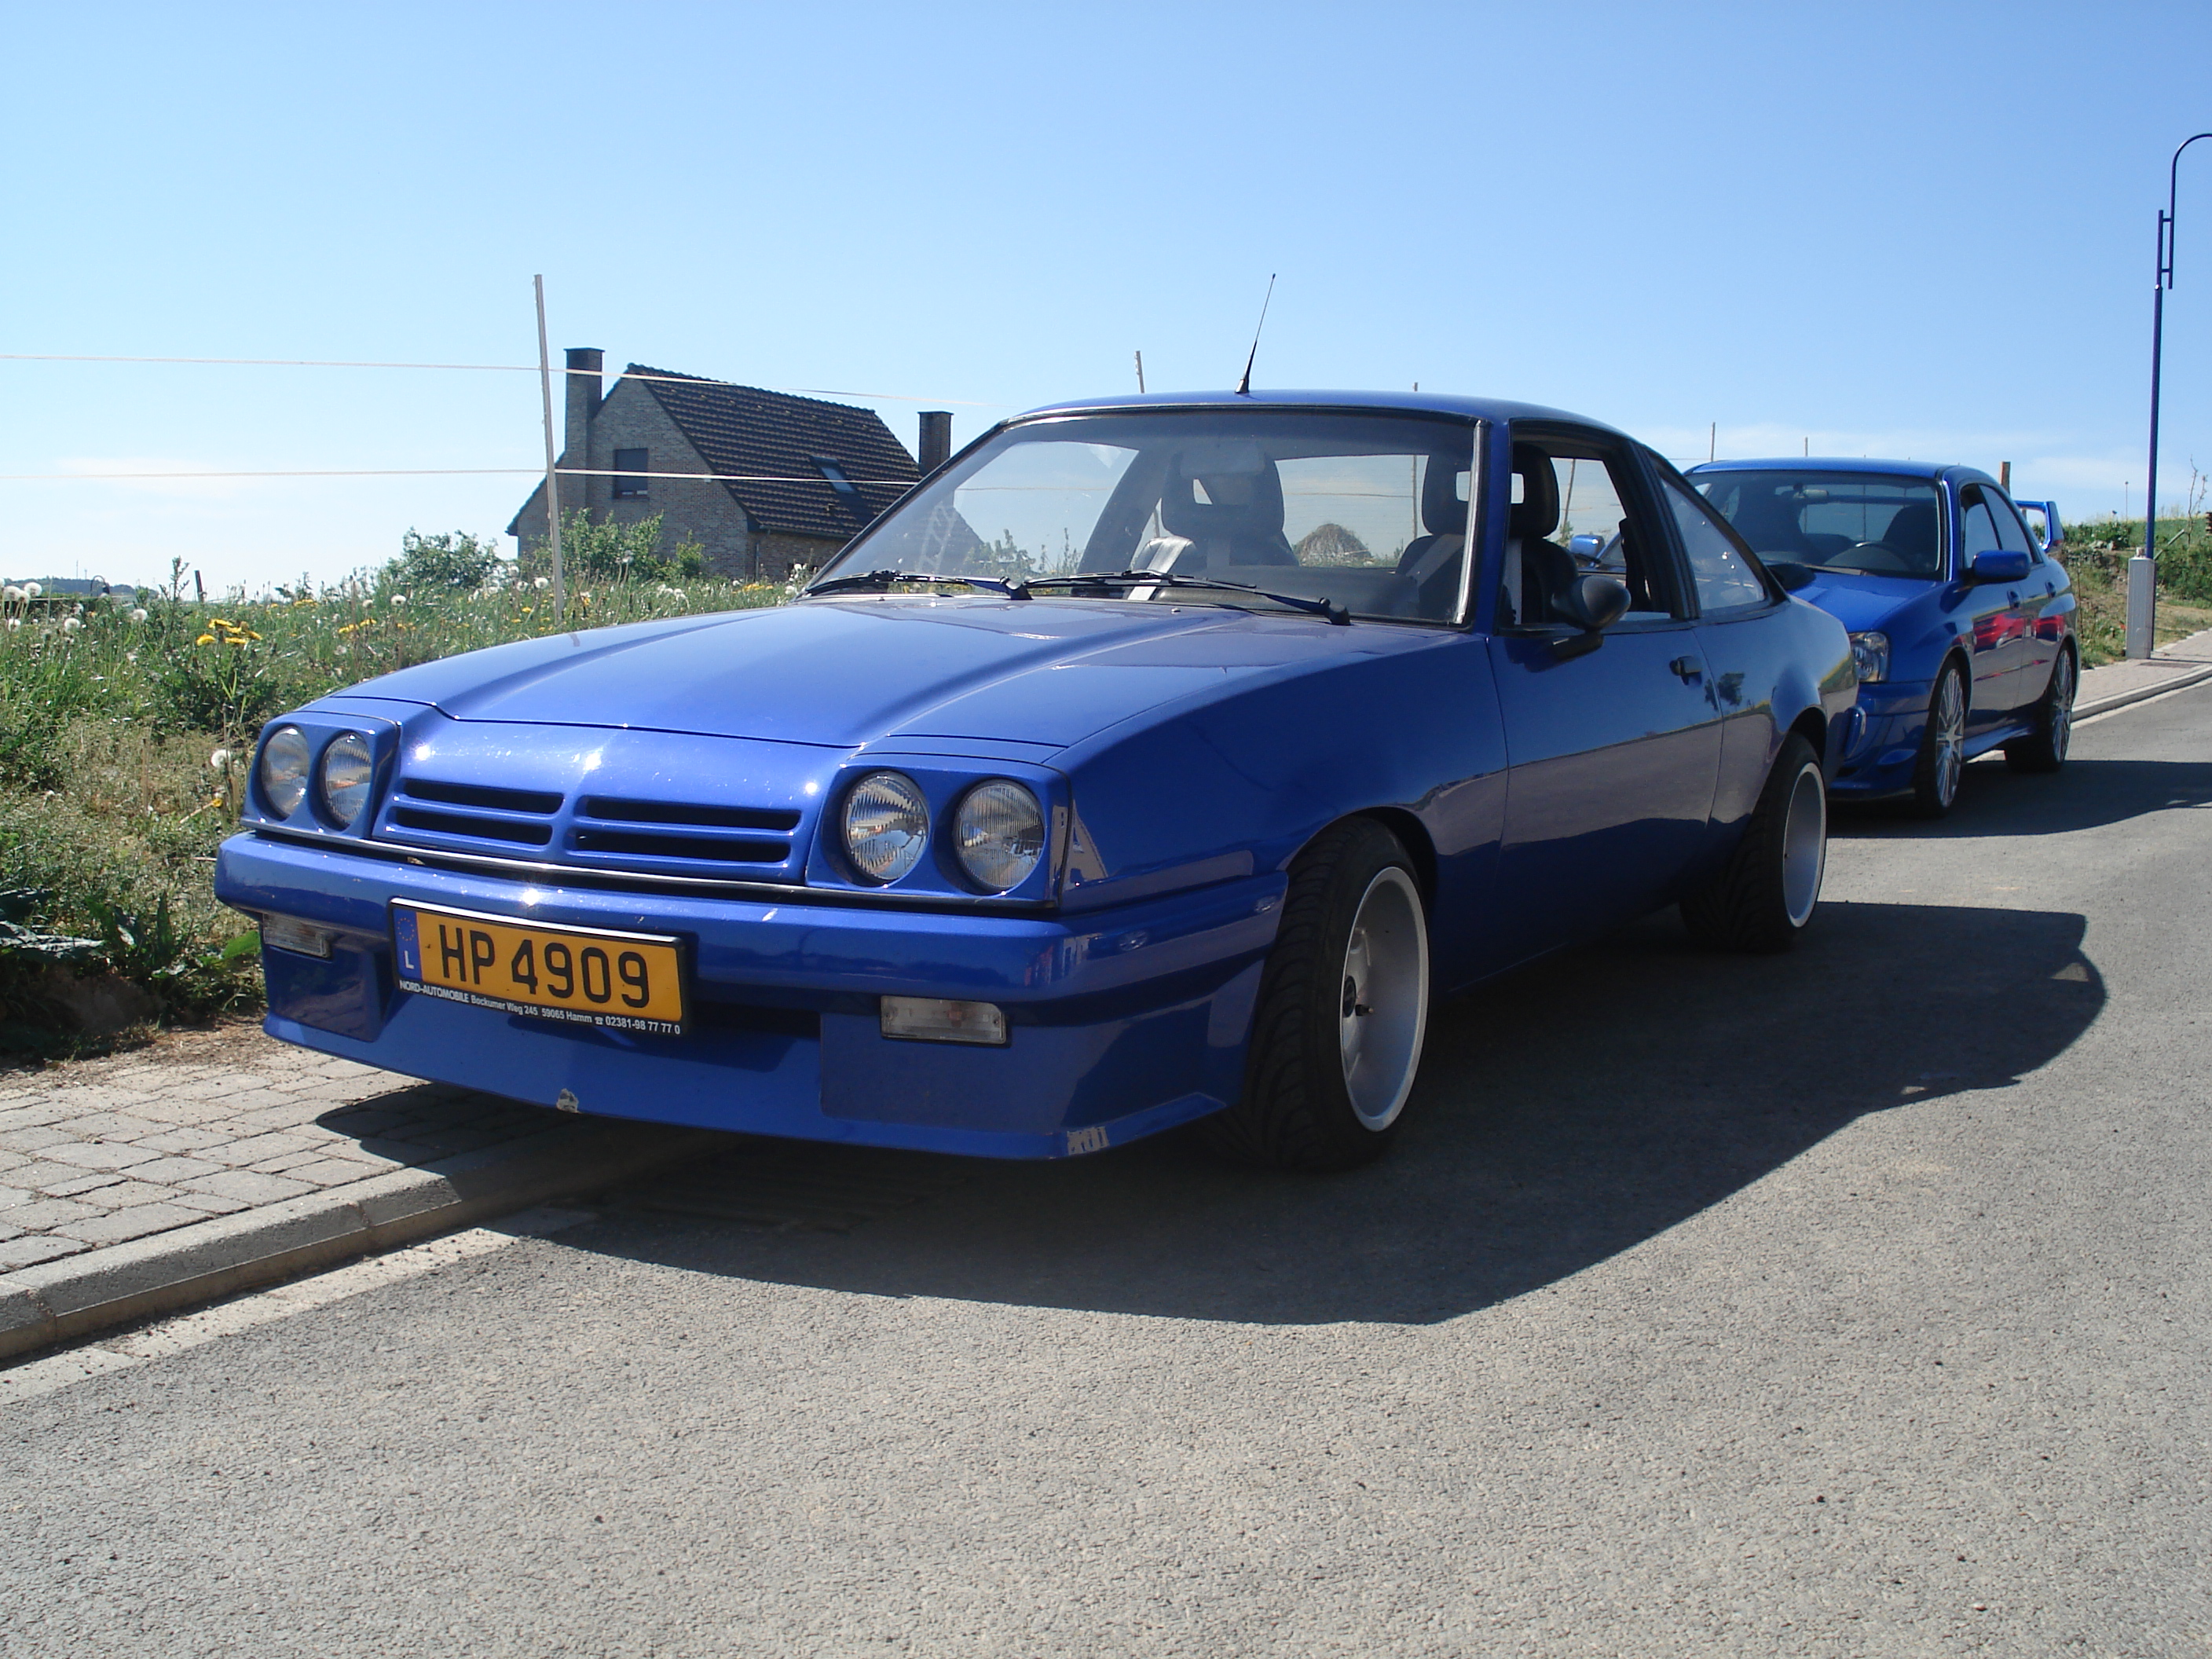 Opel Manta GSI Hatchback. View Download Wallpaper. 2816x2112. Comments